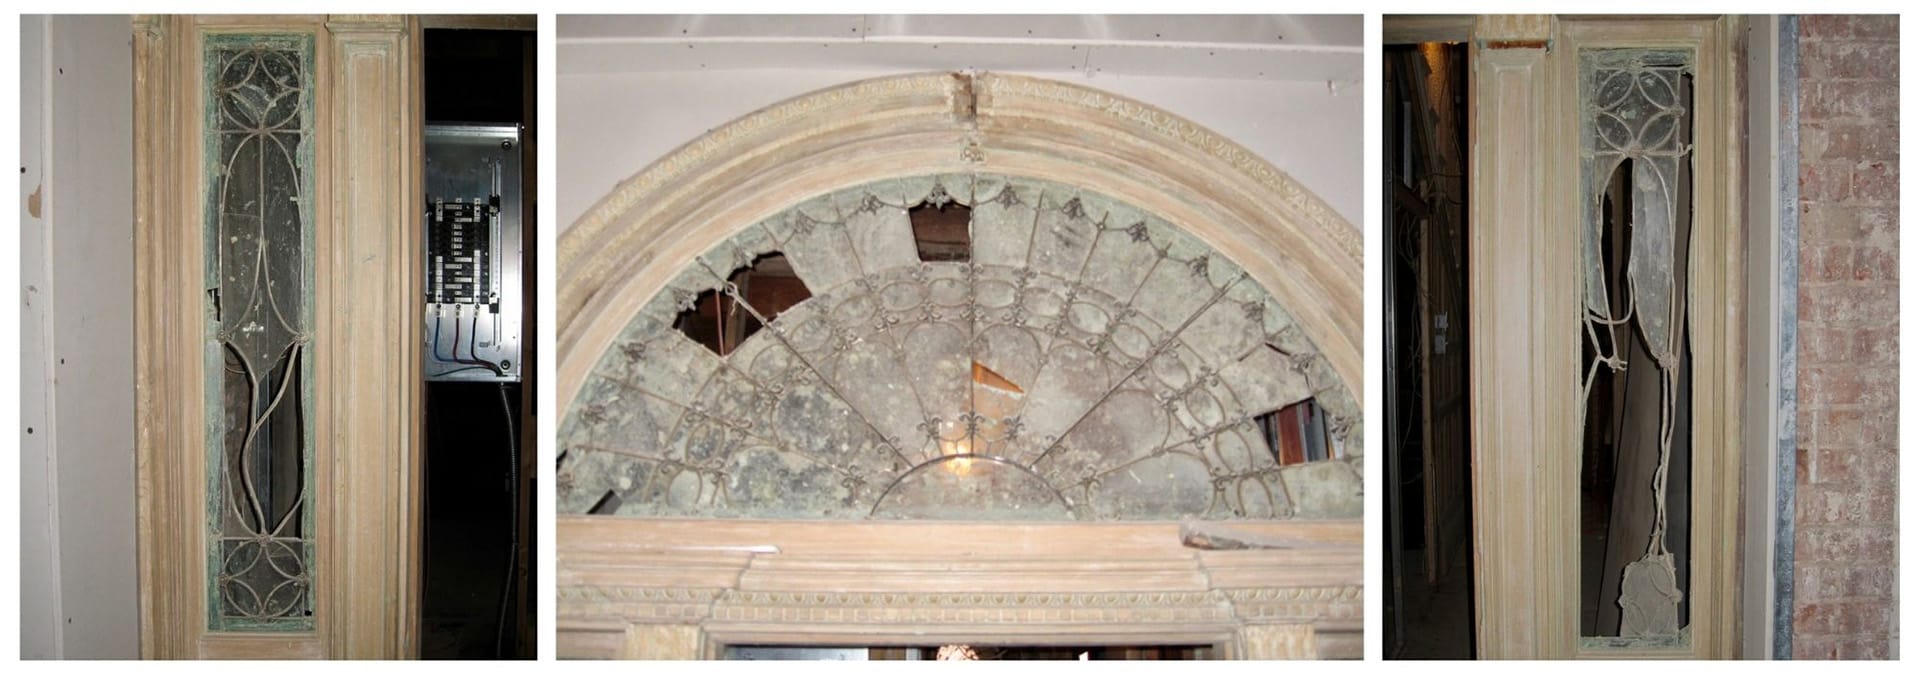 Collage of three images showing existing glass window detail in disrepair prior to renovation.